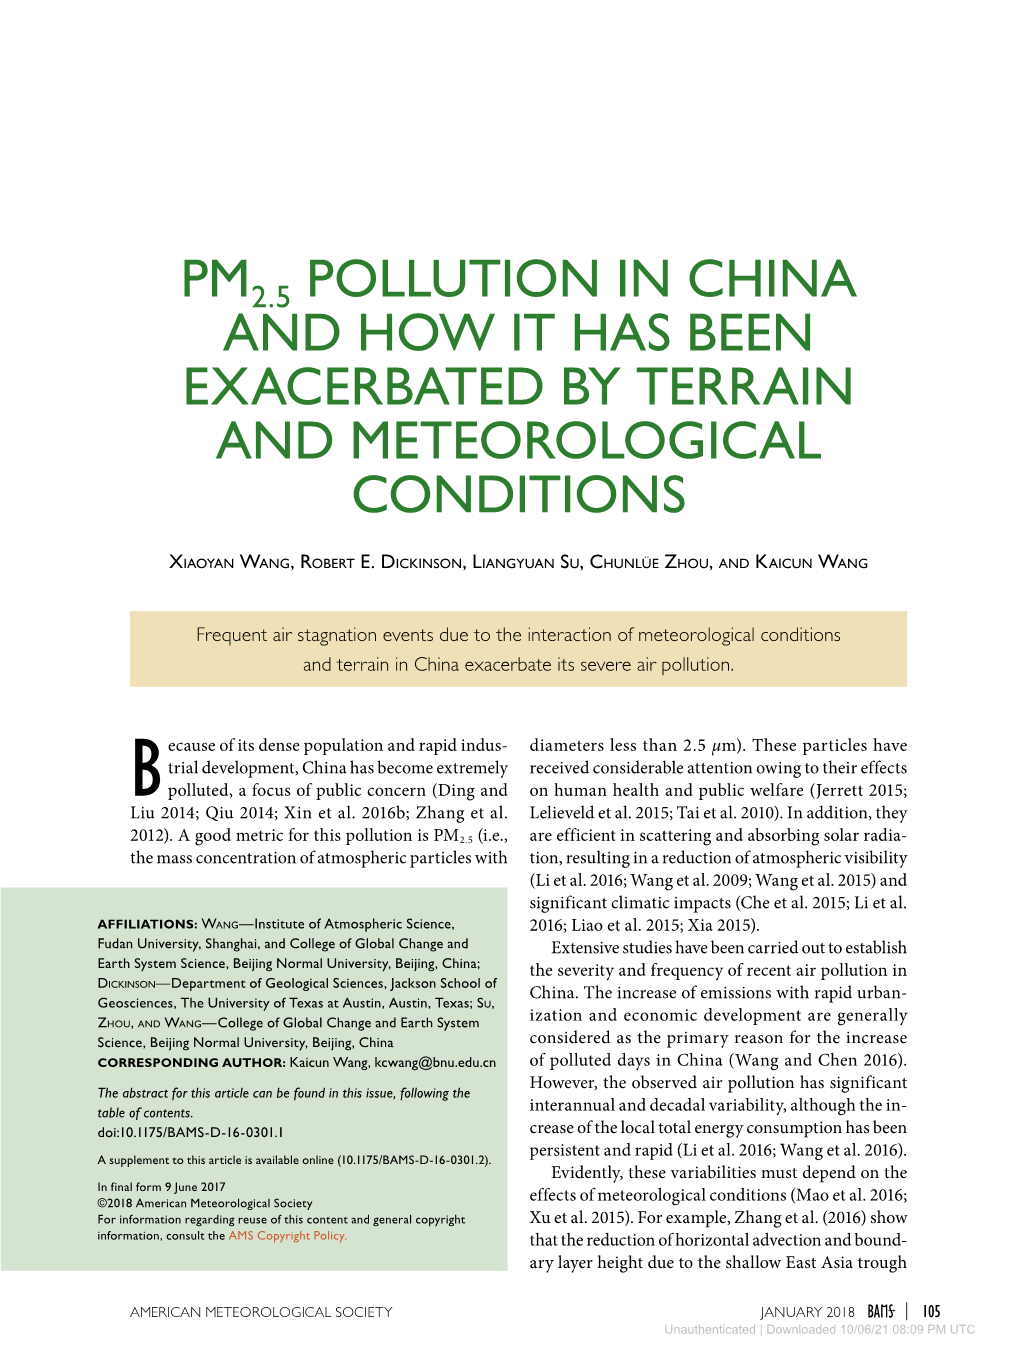 Pollution in China and How It Has Been Exacerbated by Terrain and Meteorological Conditions